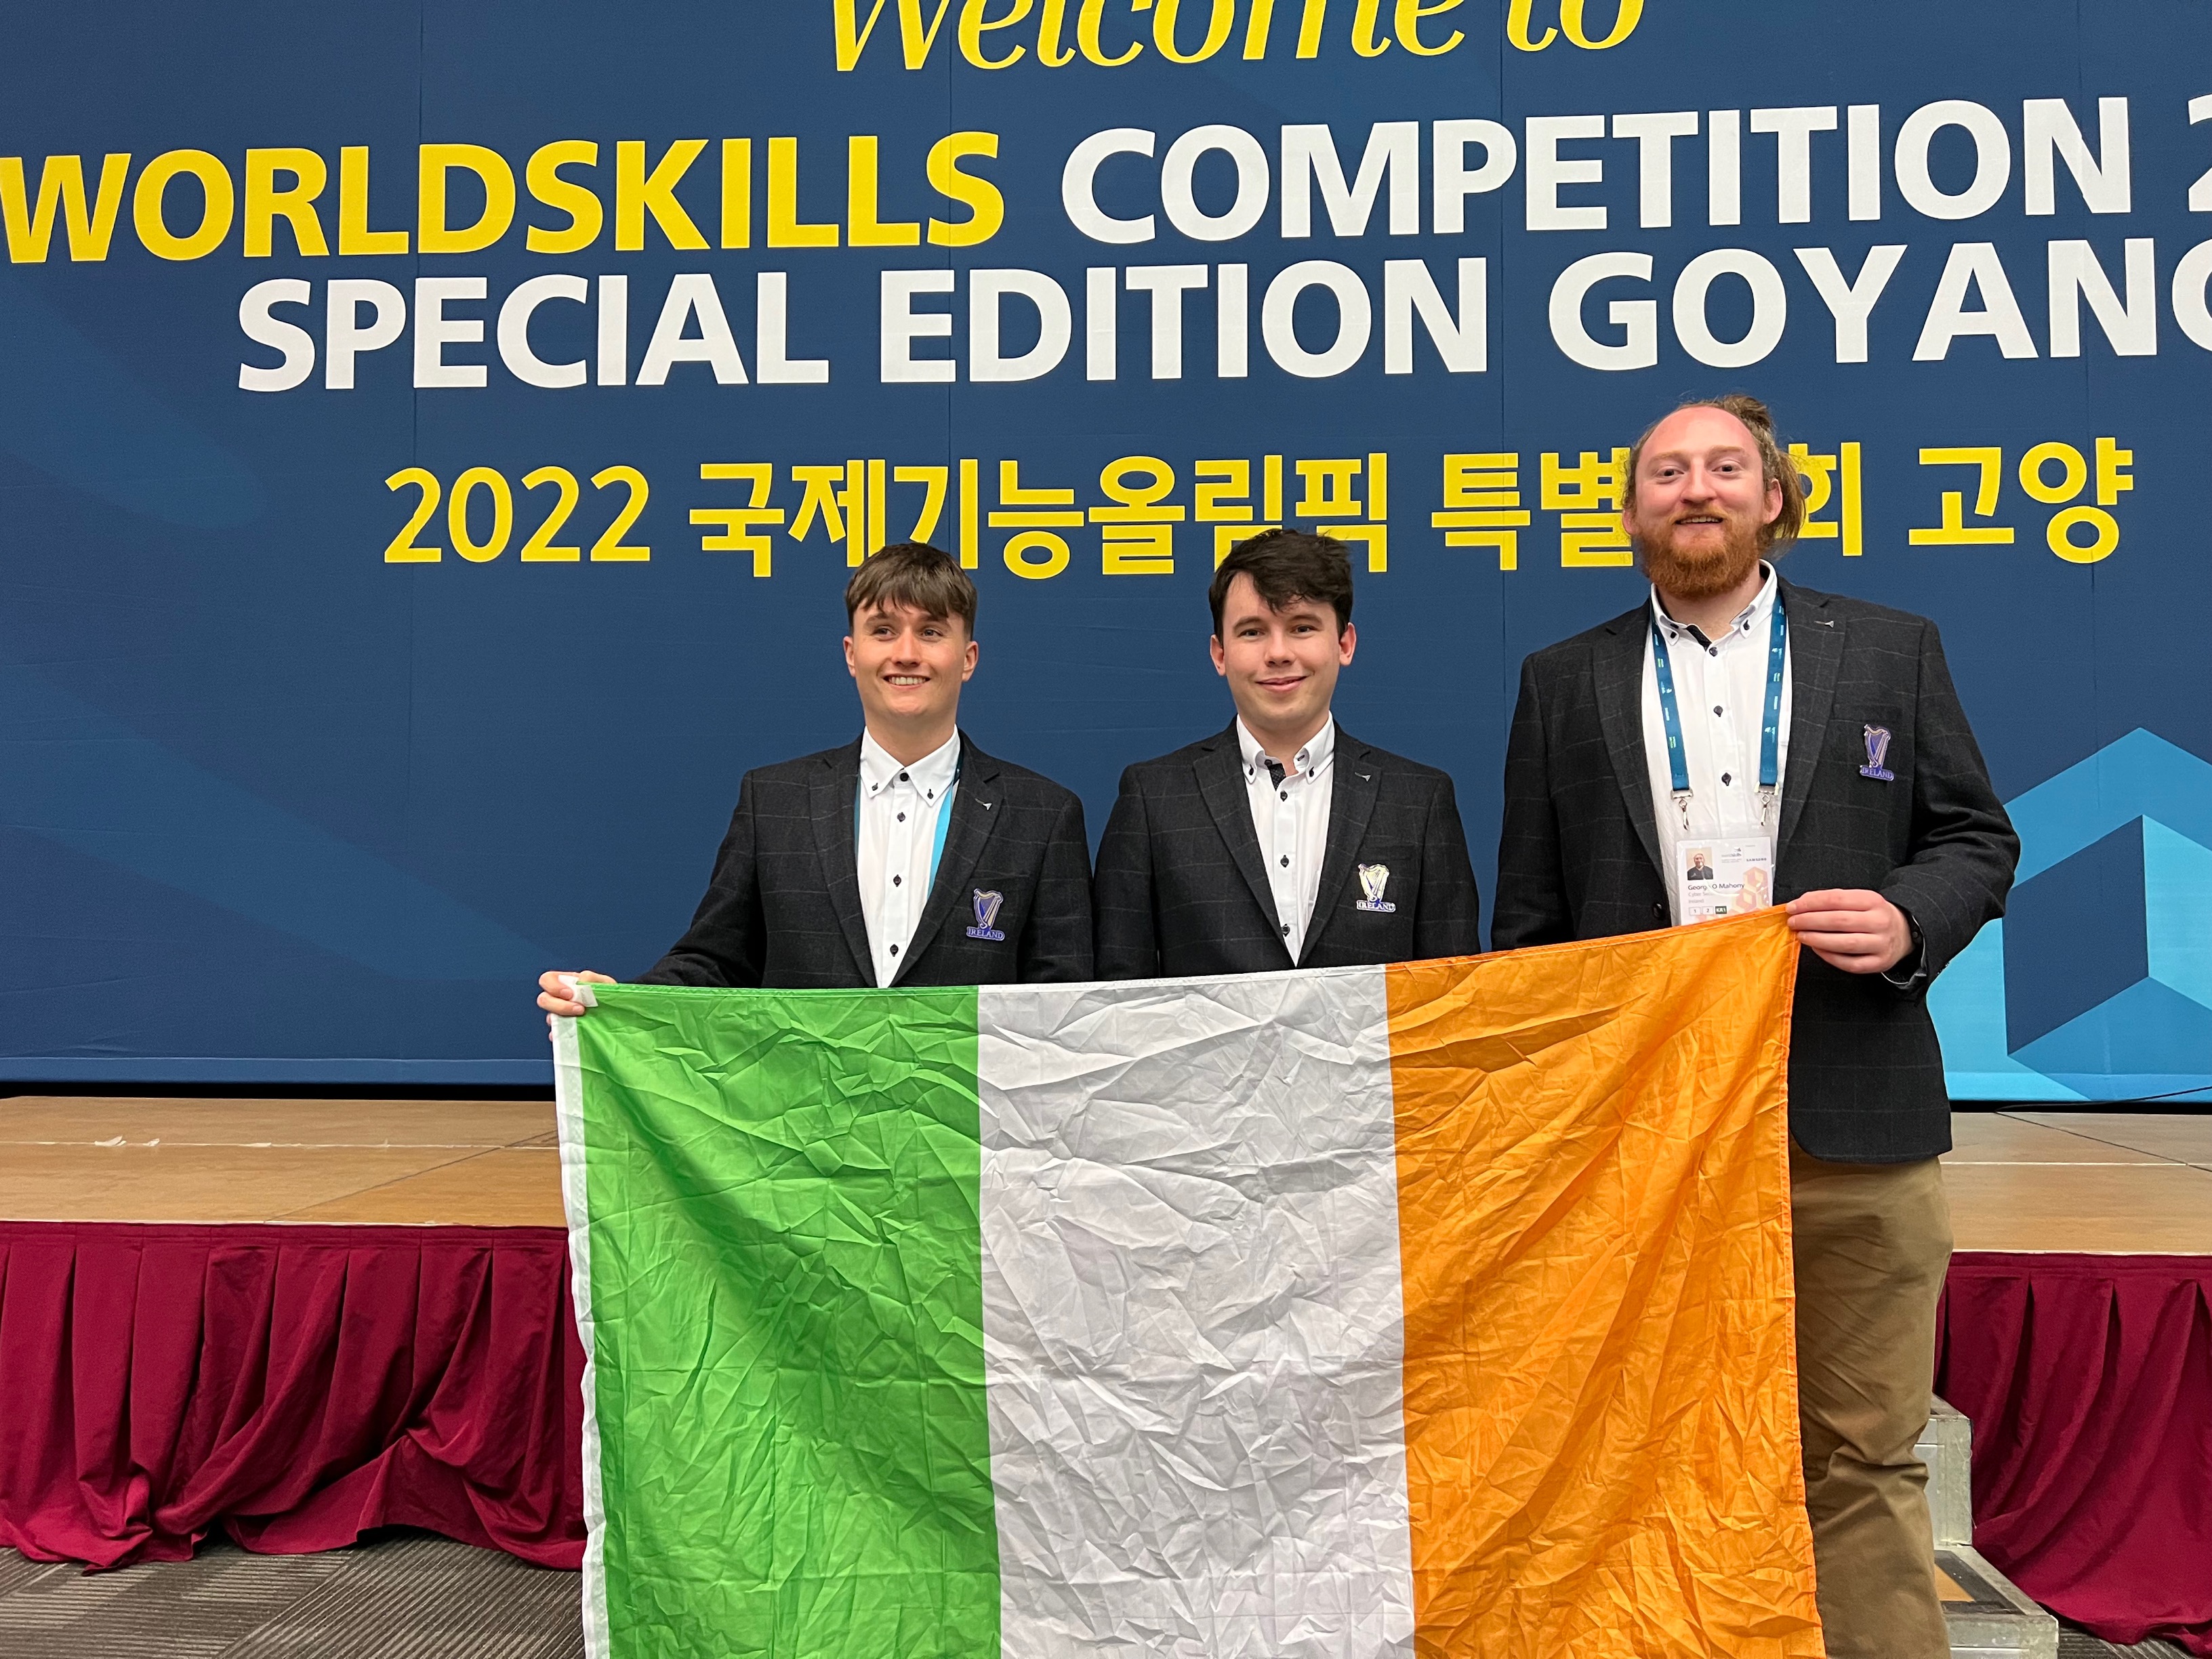 Team Ireland at the 46th World Skills Competition 2022 in South Korea